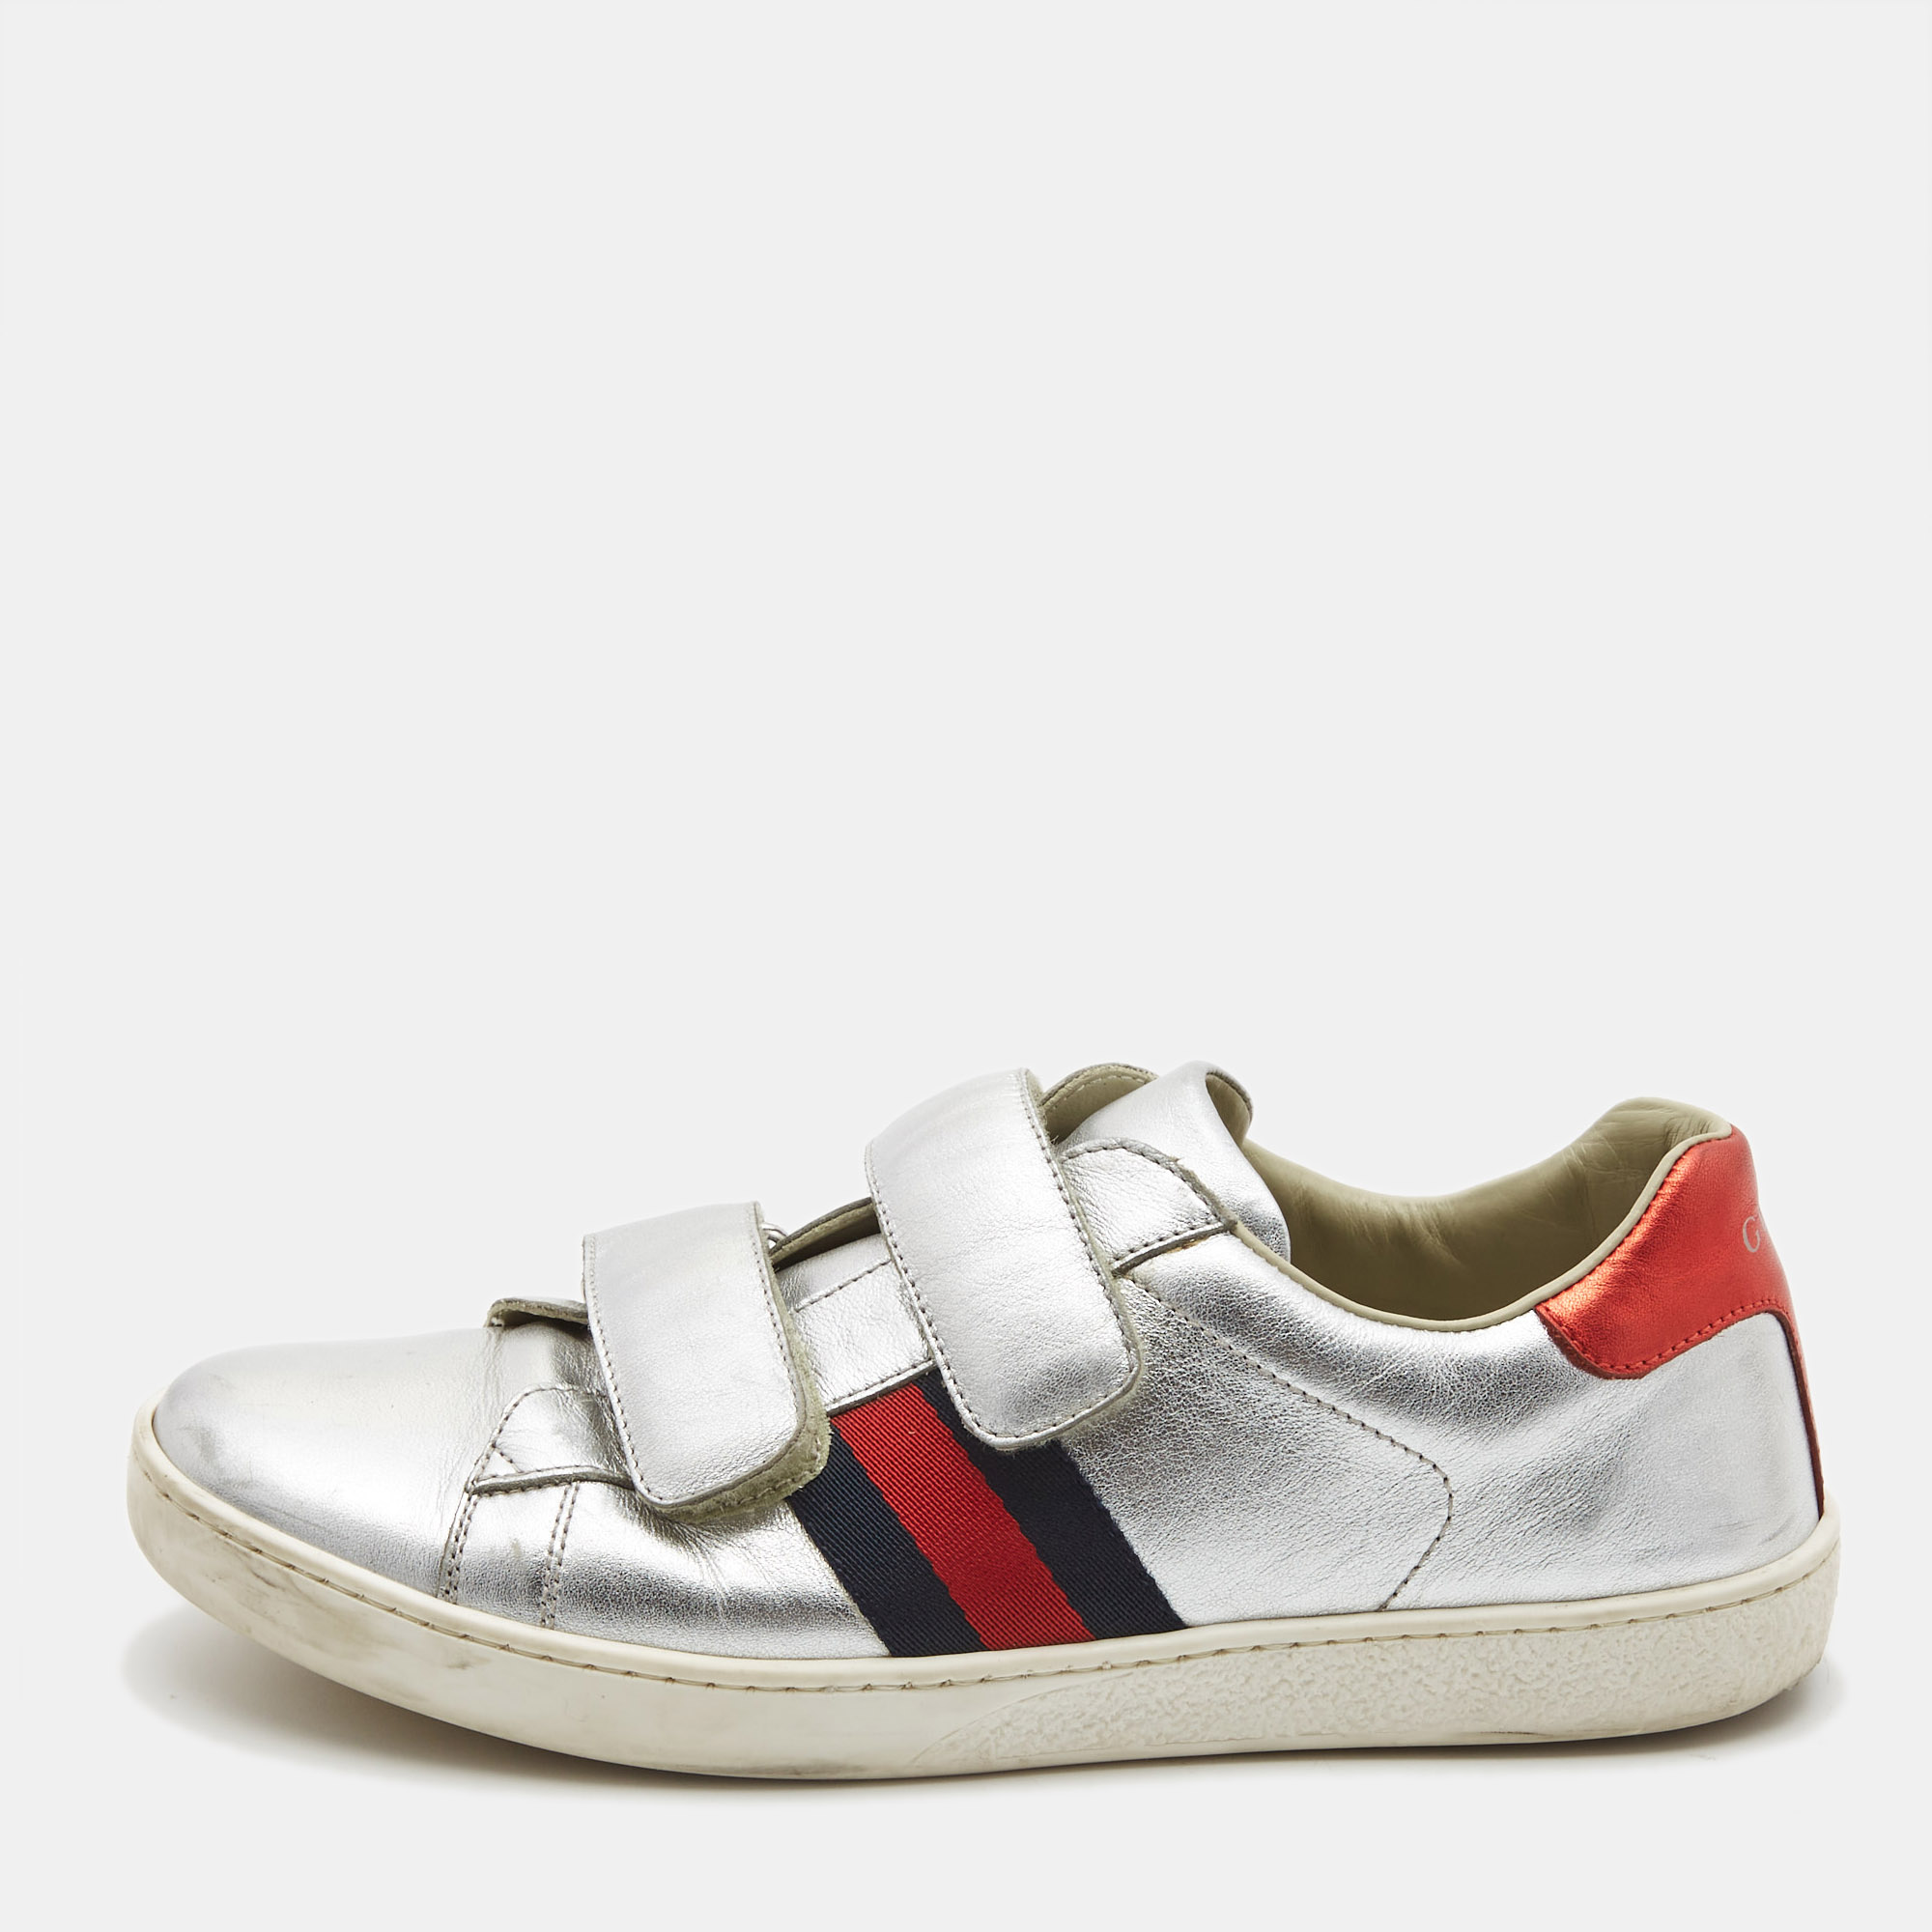 Gucci silver leather ace web low top sneakers size 36